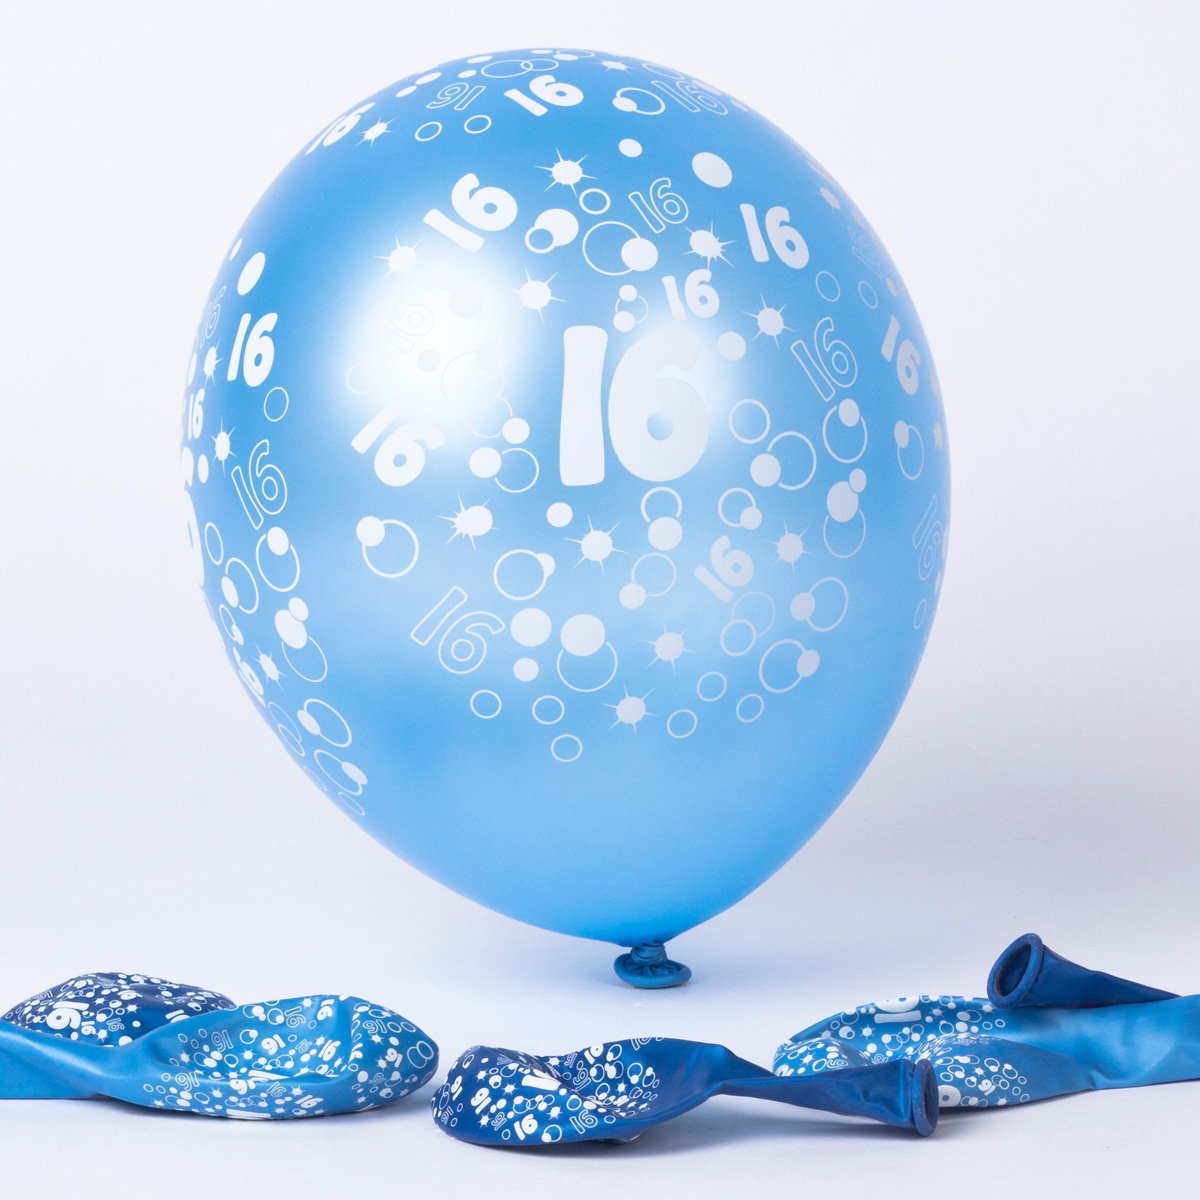 Buy Metallic Blue Circles 16th Birthday Balloons Pack Of 6 For Gbp 1